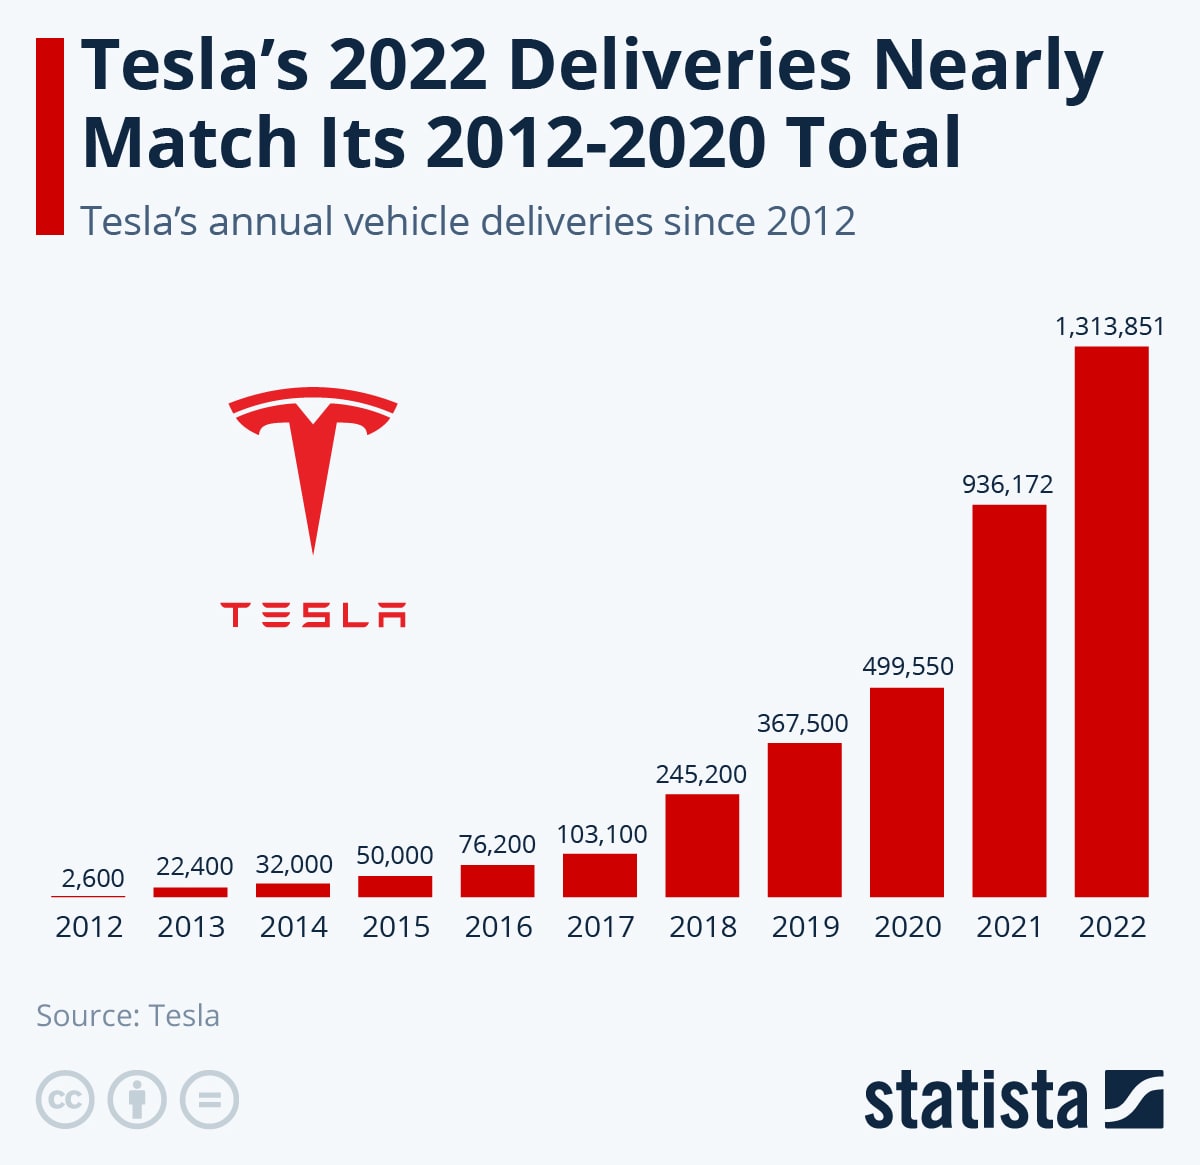 Tesla set new records in production and deliveries while beating analyst expectations.